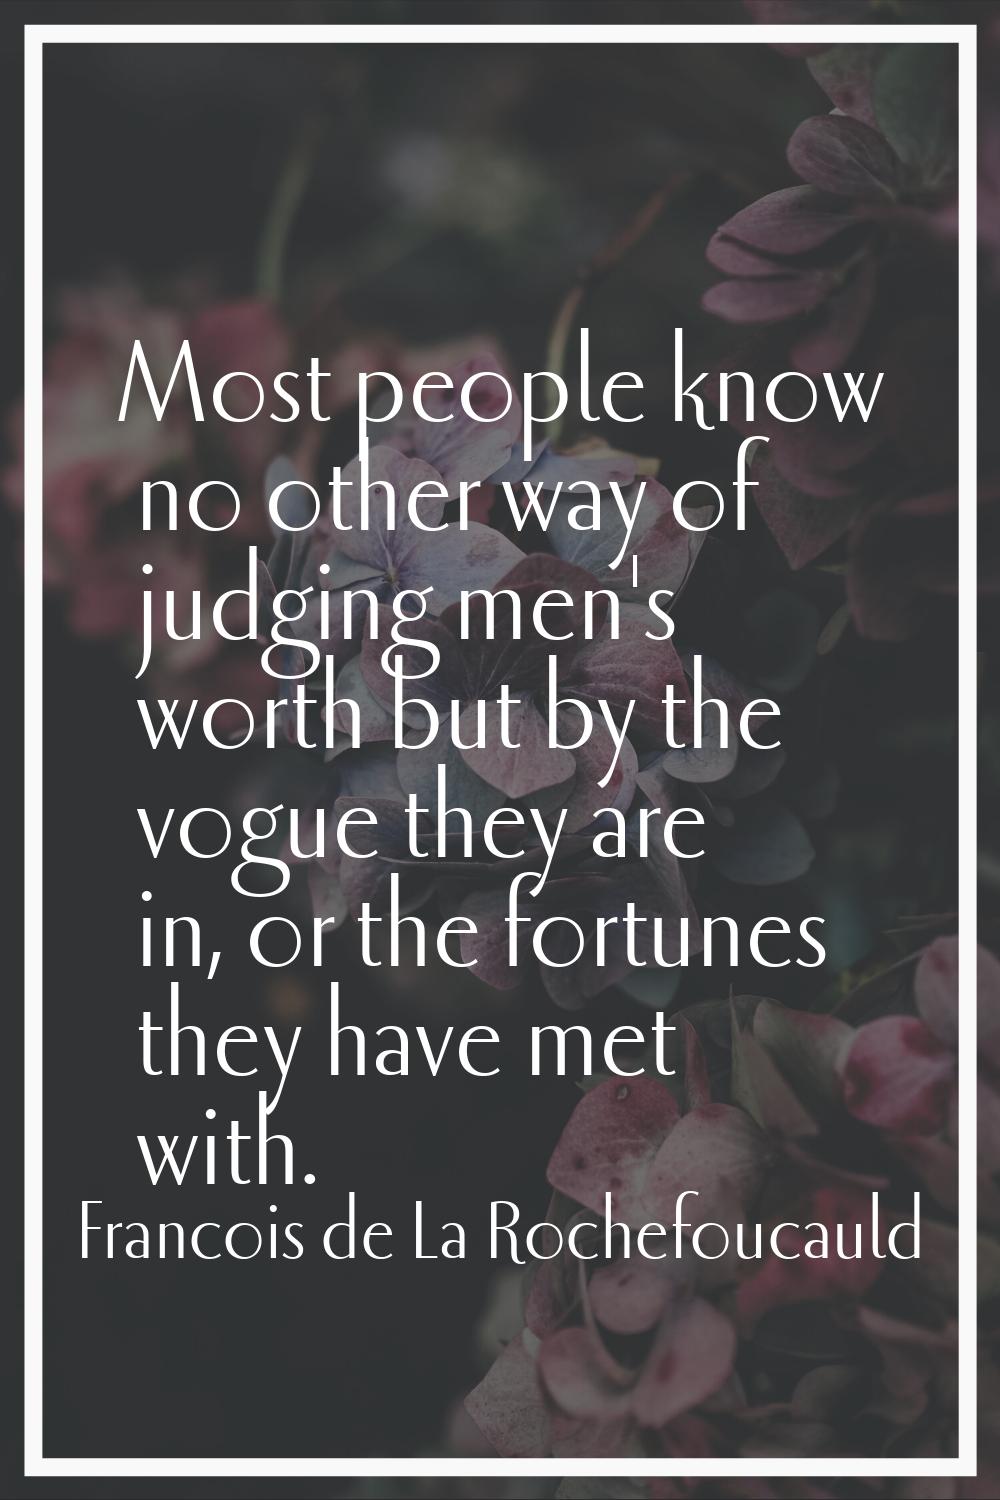 Most people know no other way of judging men's worth but by the vogue they are in, or the fortunes 